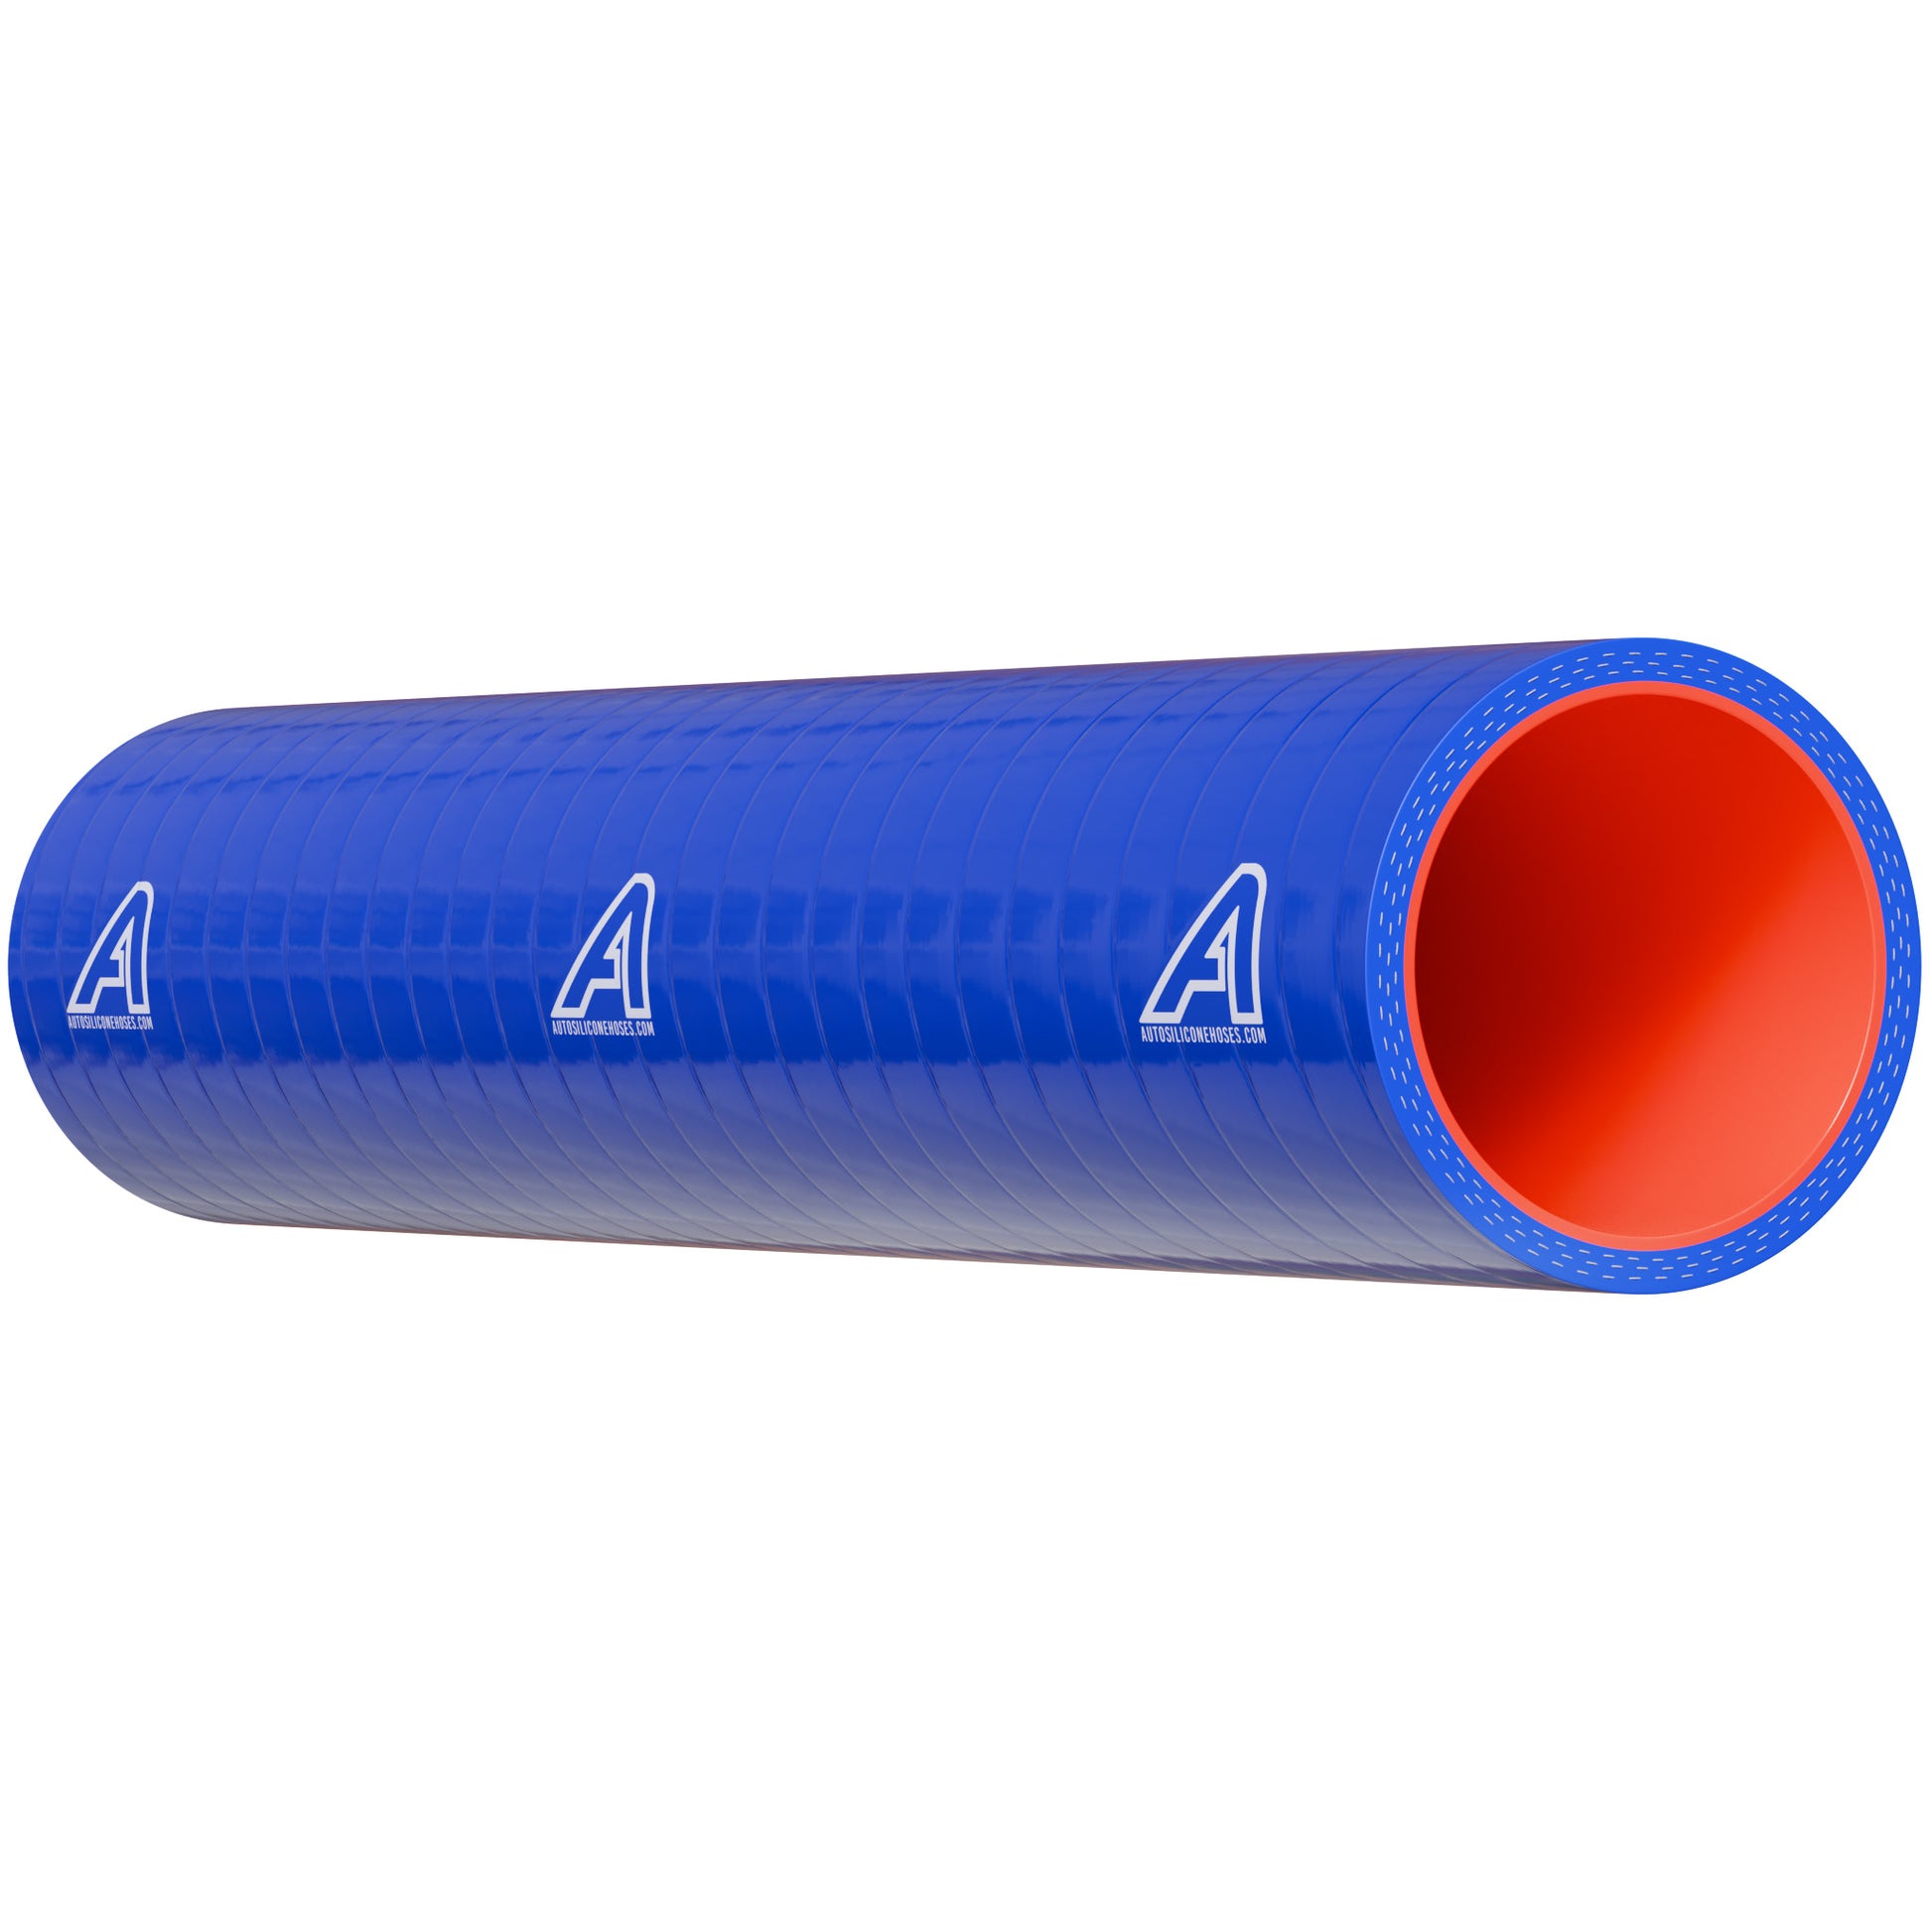 9.5mm ID Silicone Flouro Fuel & Oil Hose Joiner Motor Vehicle Engine Parts Auto Silicone Hoses   